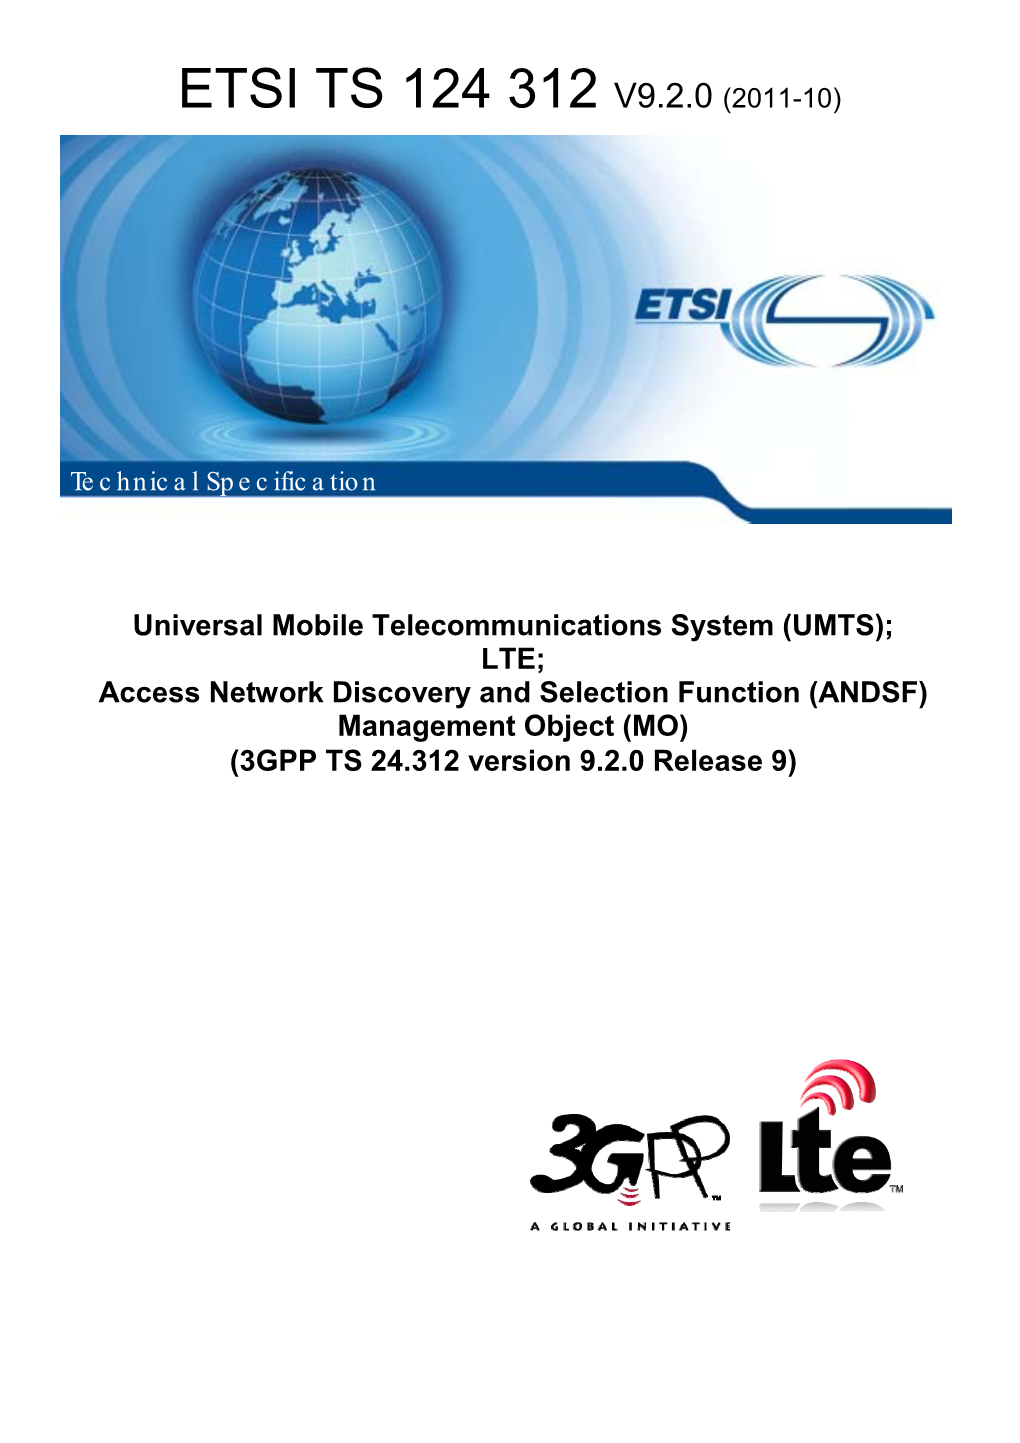 LTE; Access Network Discovery and Selection Function (ANDSF) Management Object (MO) (3GPP TS 24.312 Version 9.2.0 Release 9)